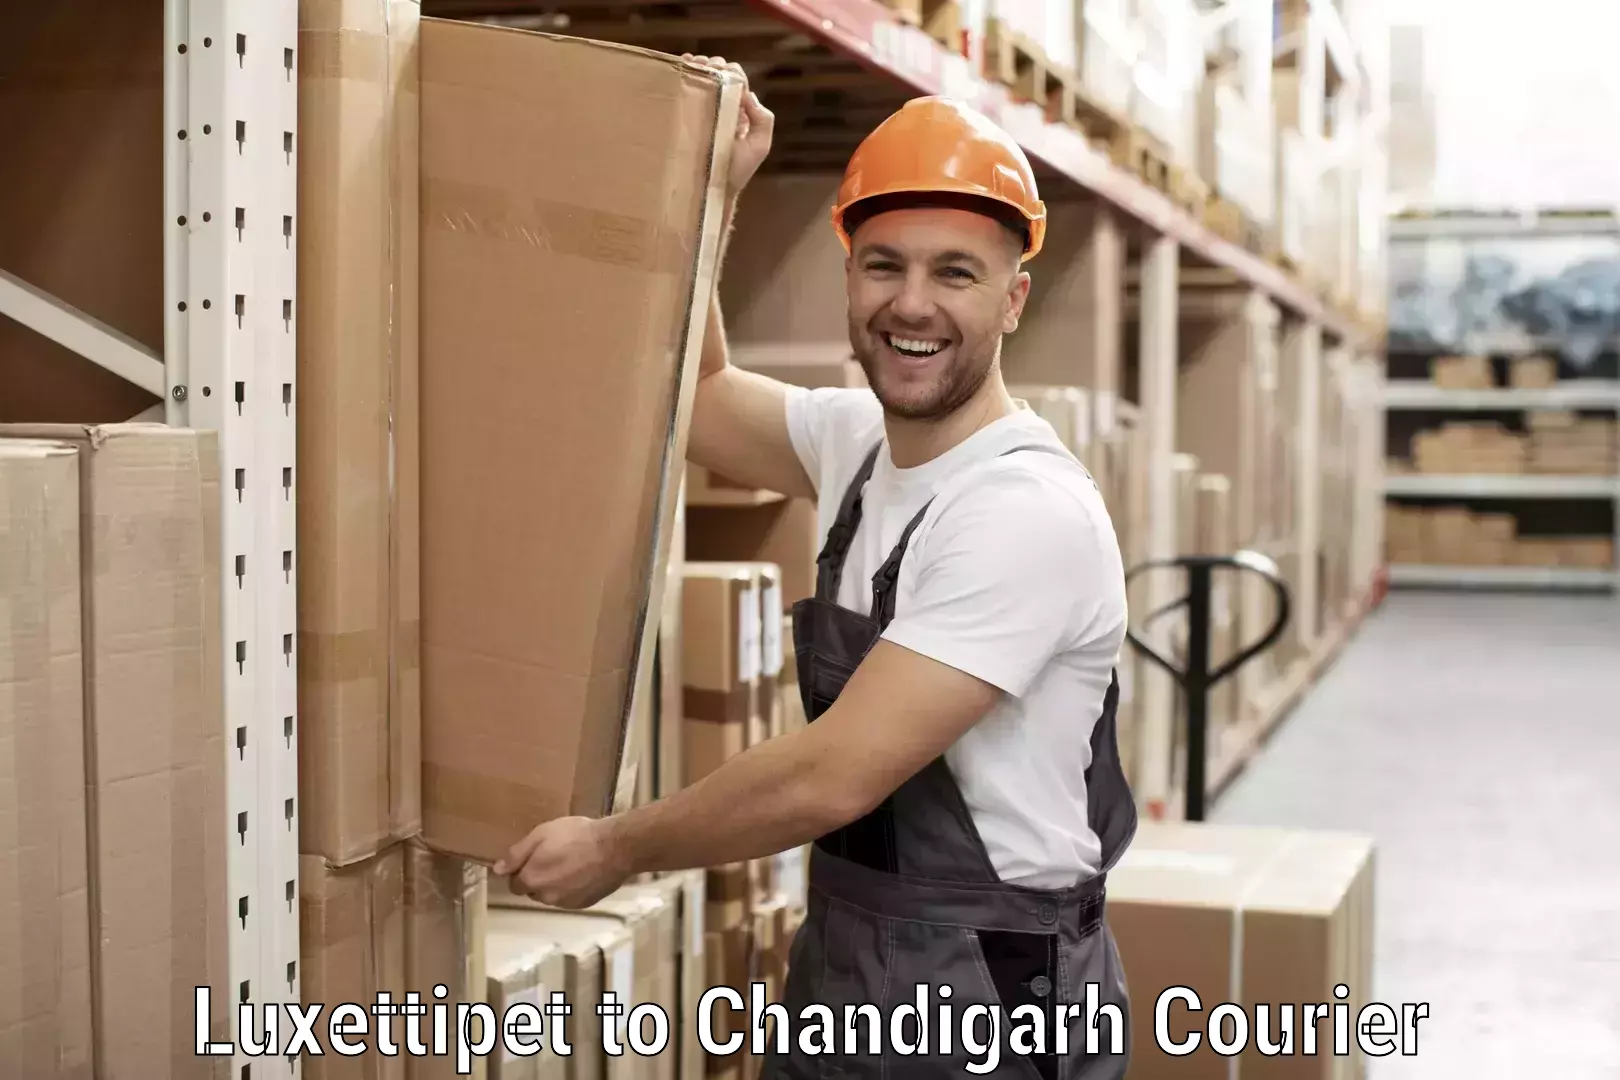 Efficient order fulfillment Luxettipet to Panjab University Chandigarh